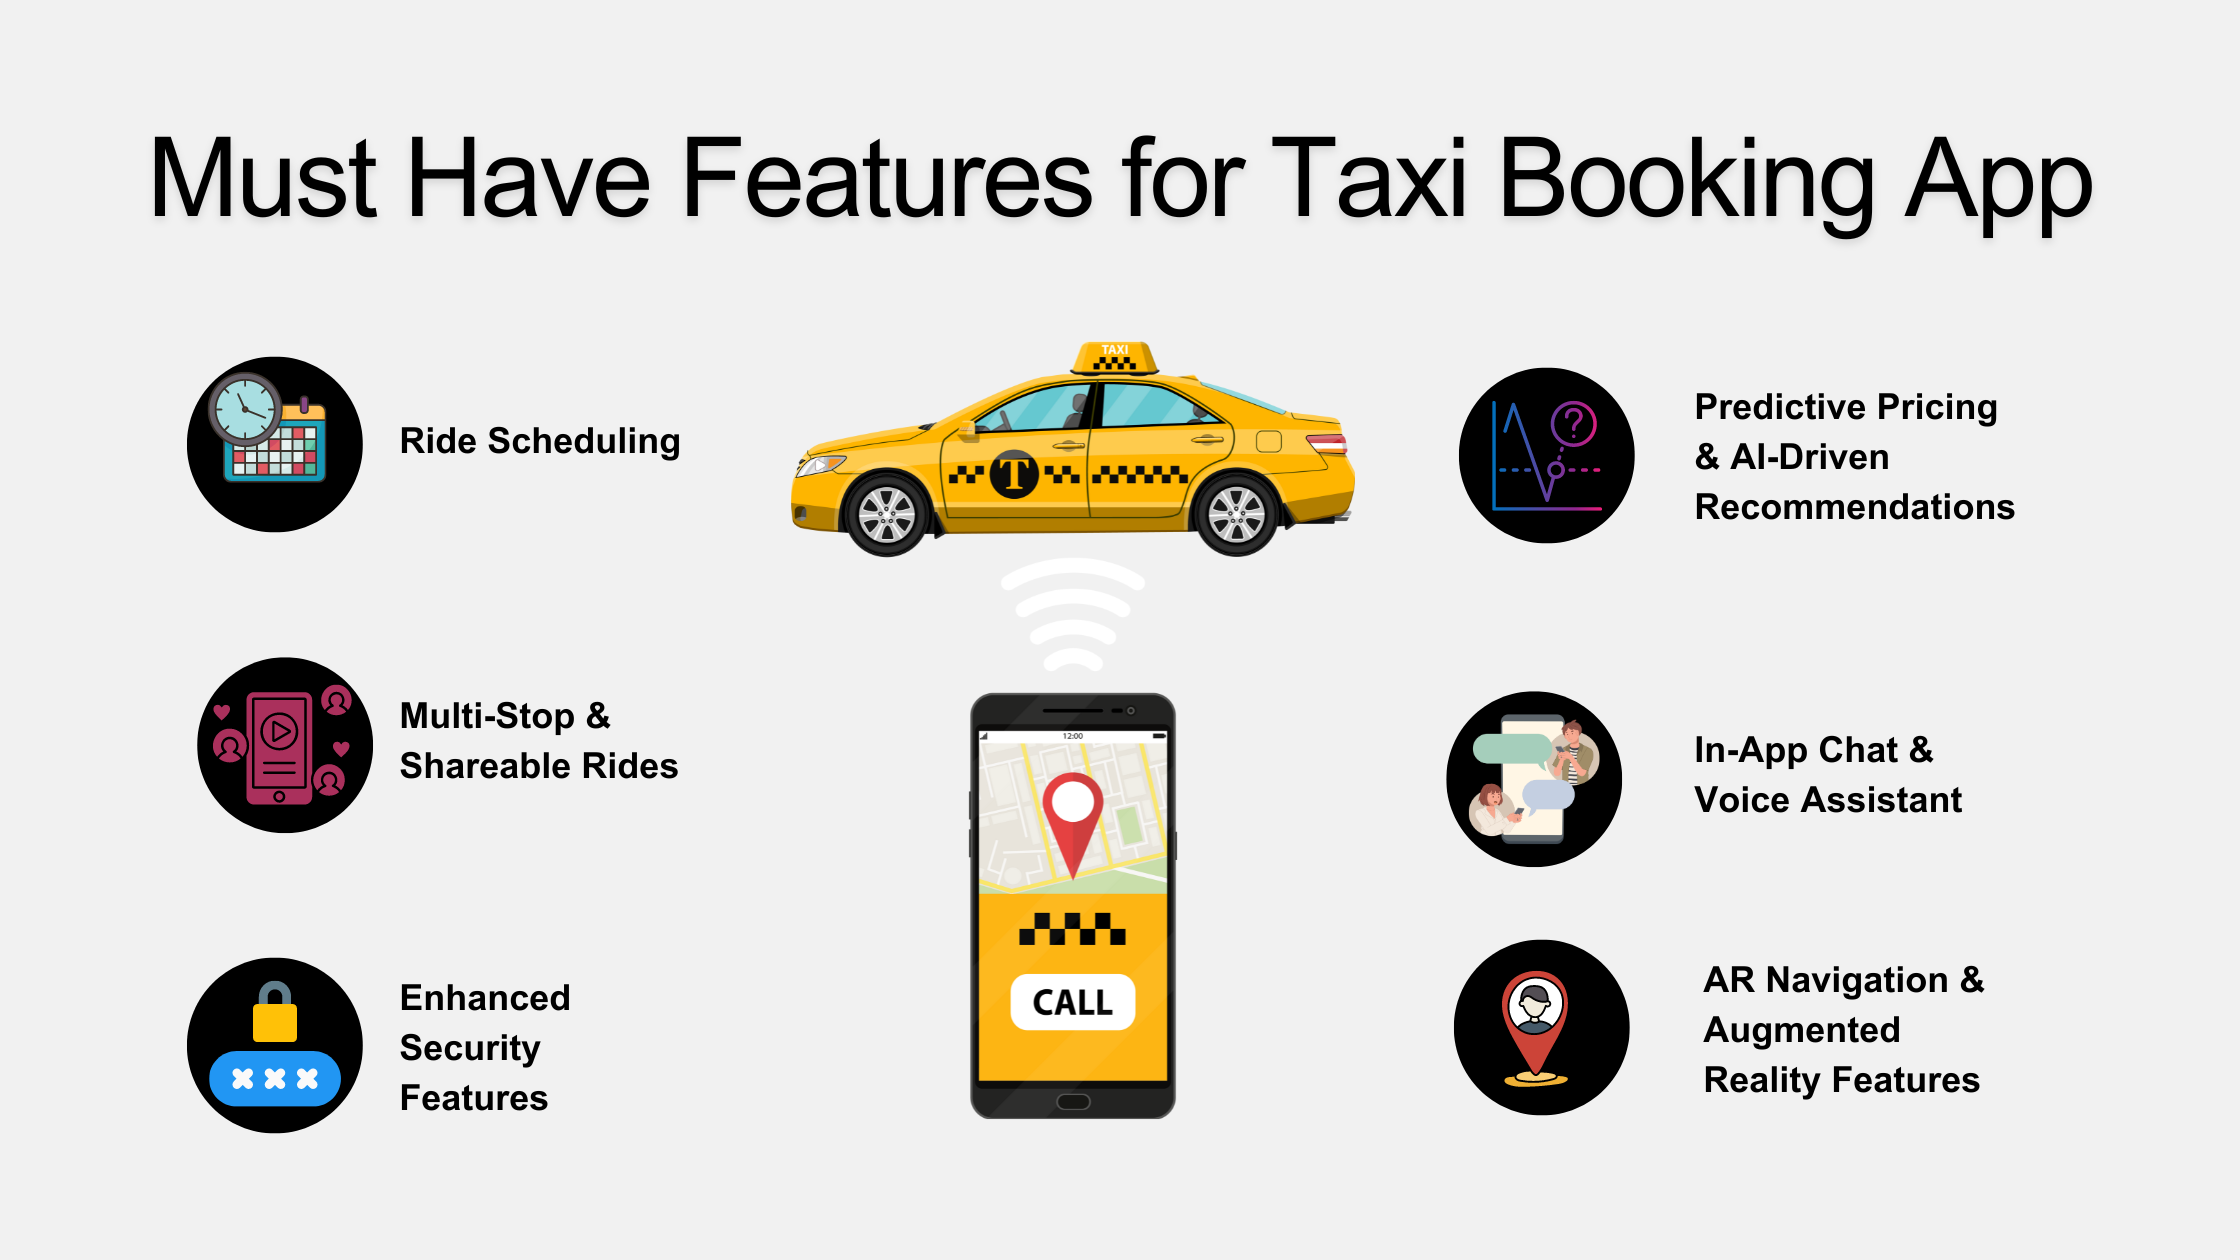 Must Have Features for Taxi Booking App